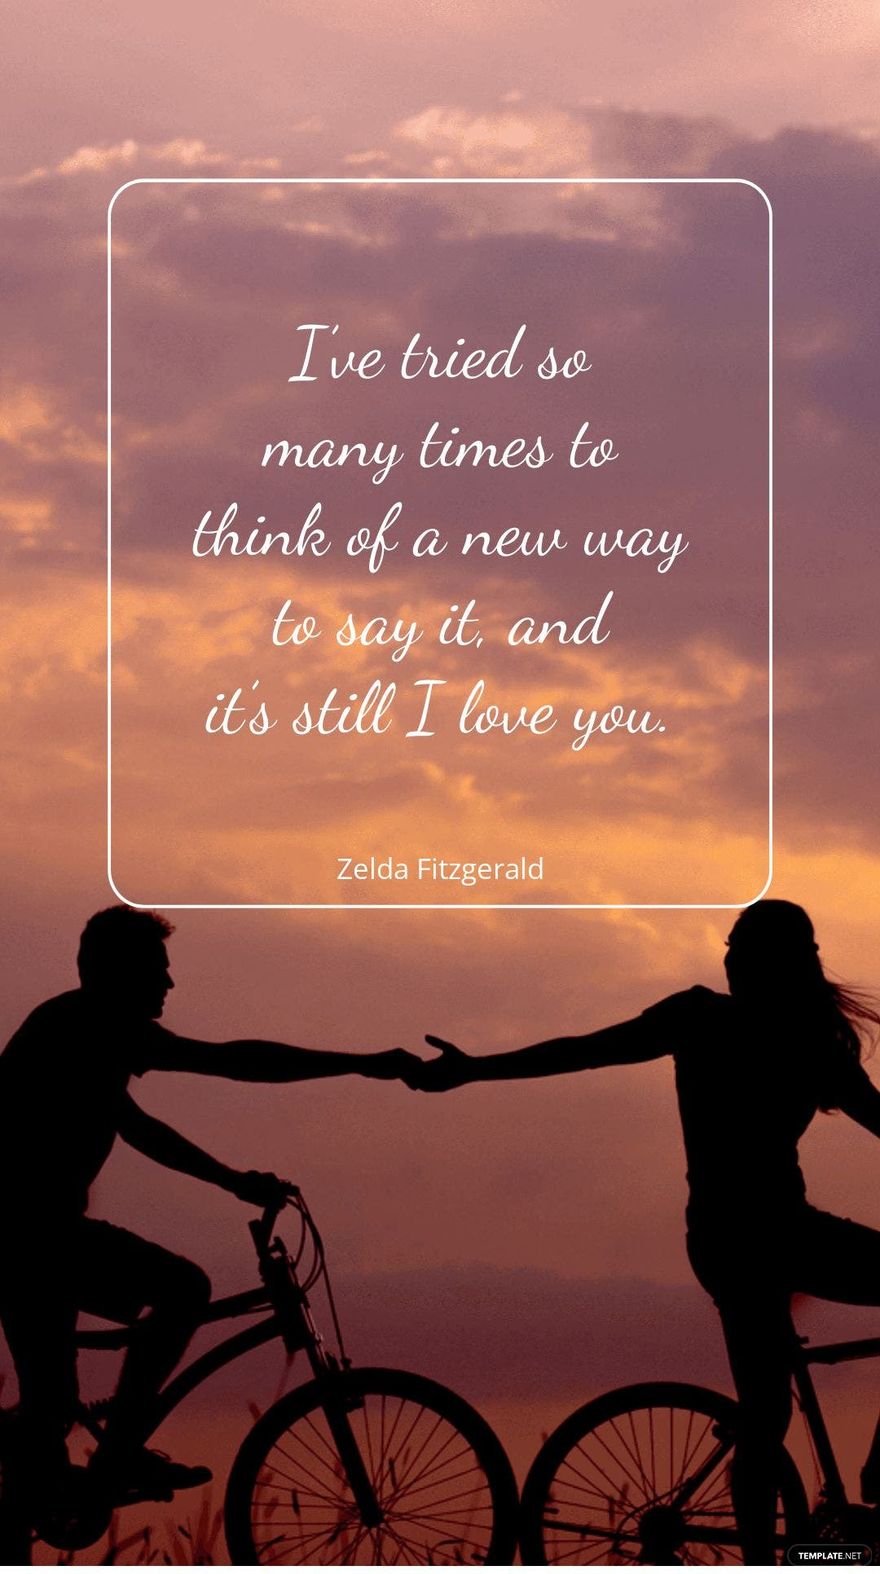 Zelda Fitzgerald - “I’ve tried so many times to think of a new way to say it, and it’s still I love you.”